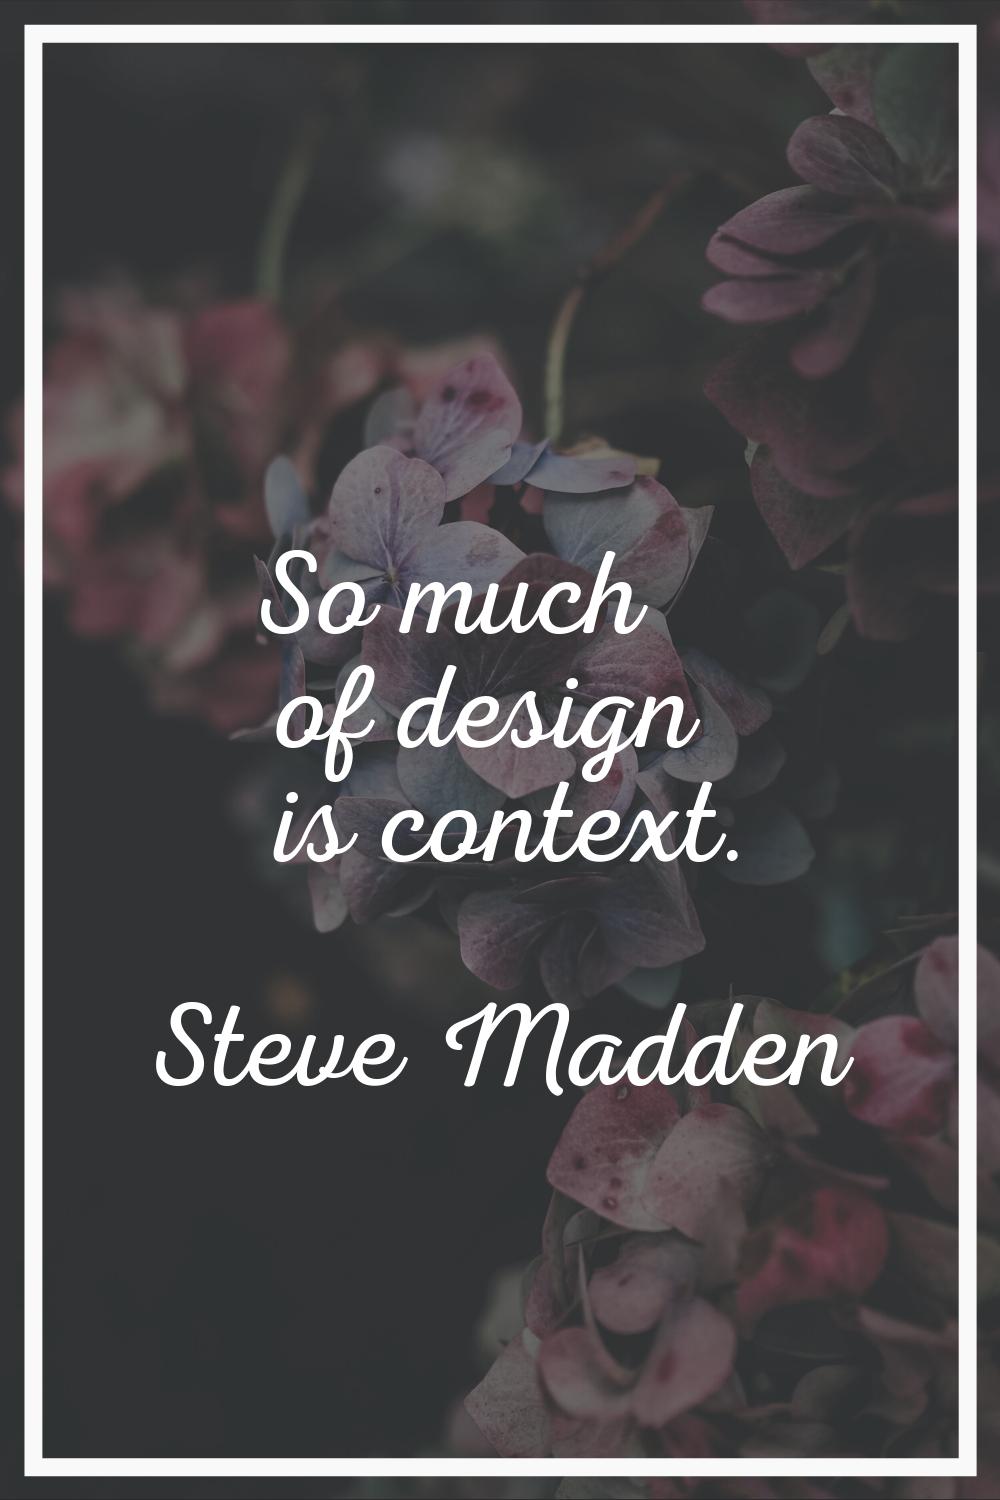 So much of design is context.